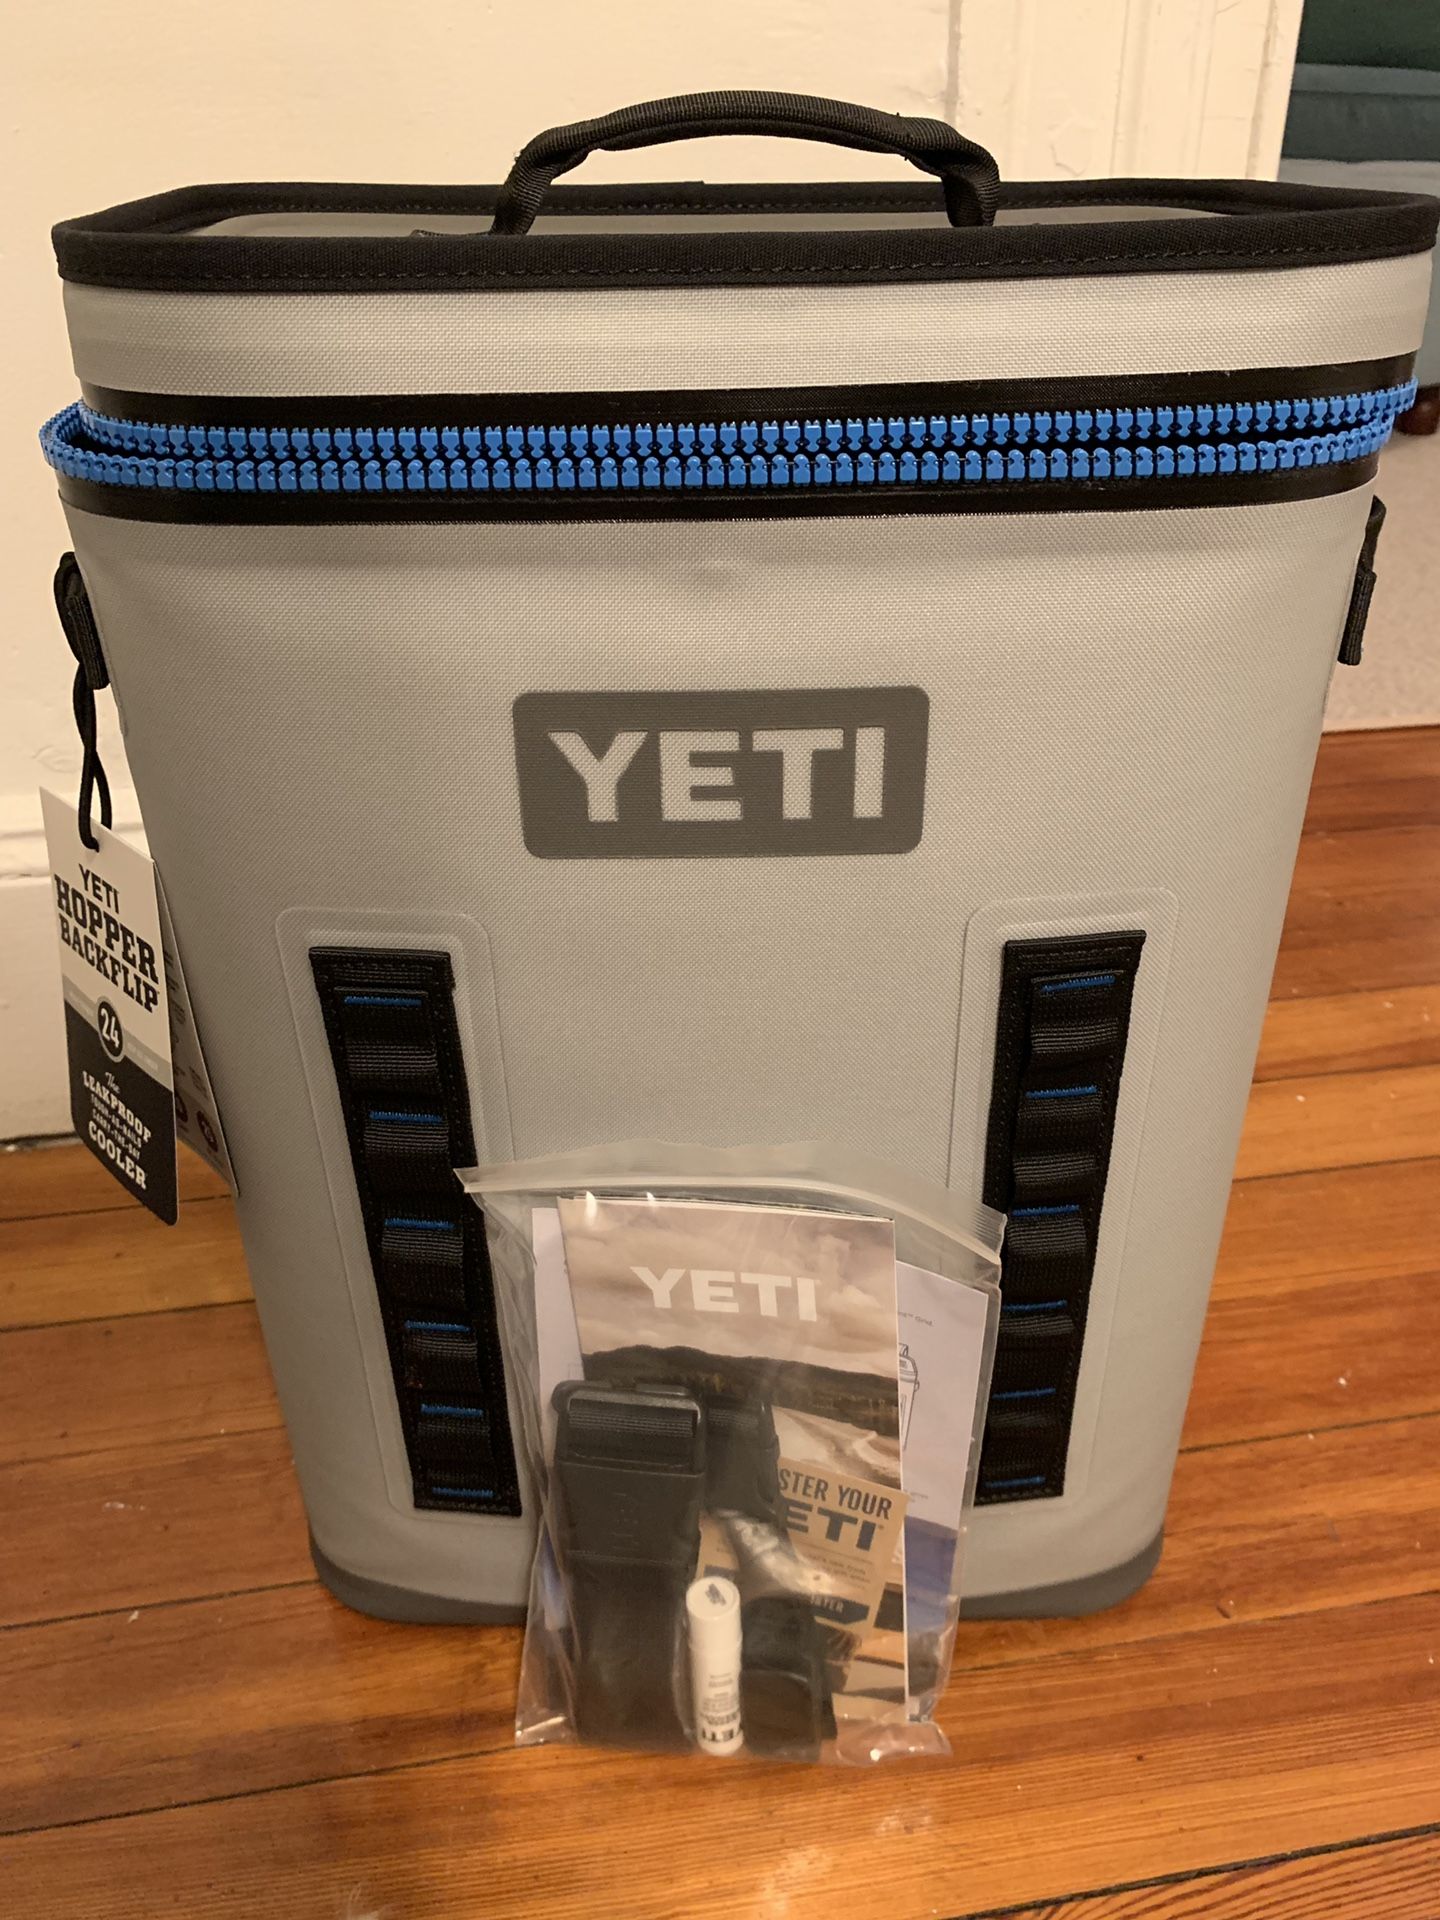 BRAND NEW W/TAGS YETI COOLER - RETAILS FOR $300